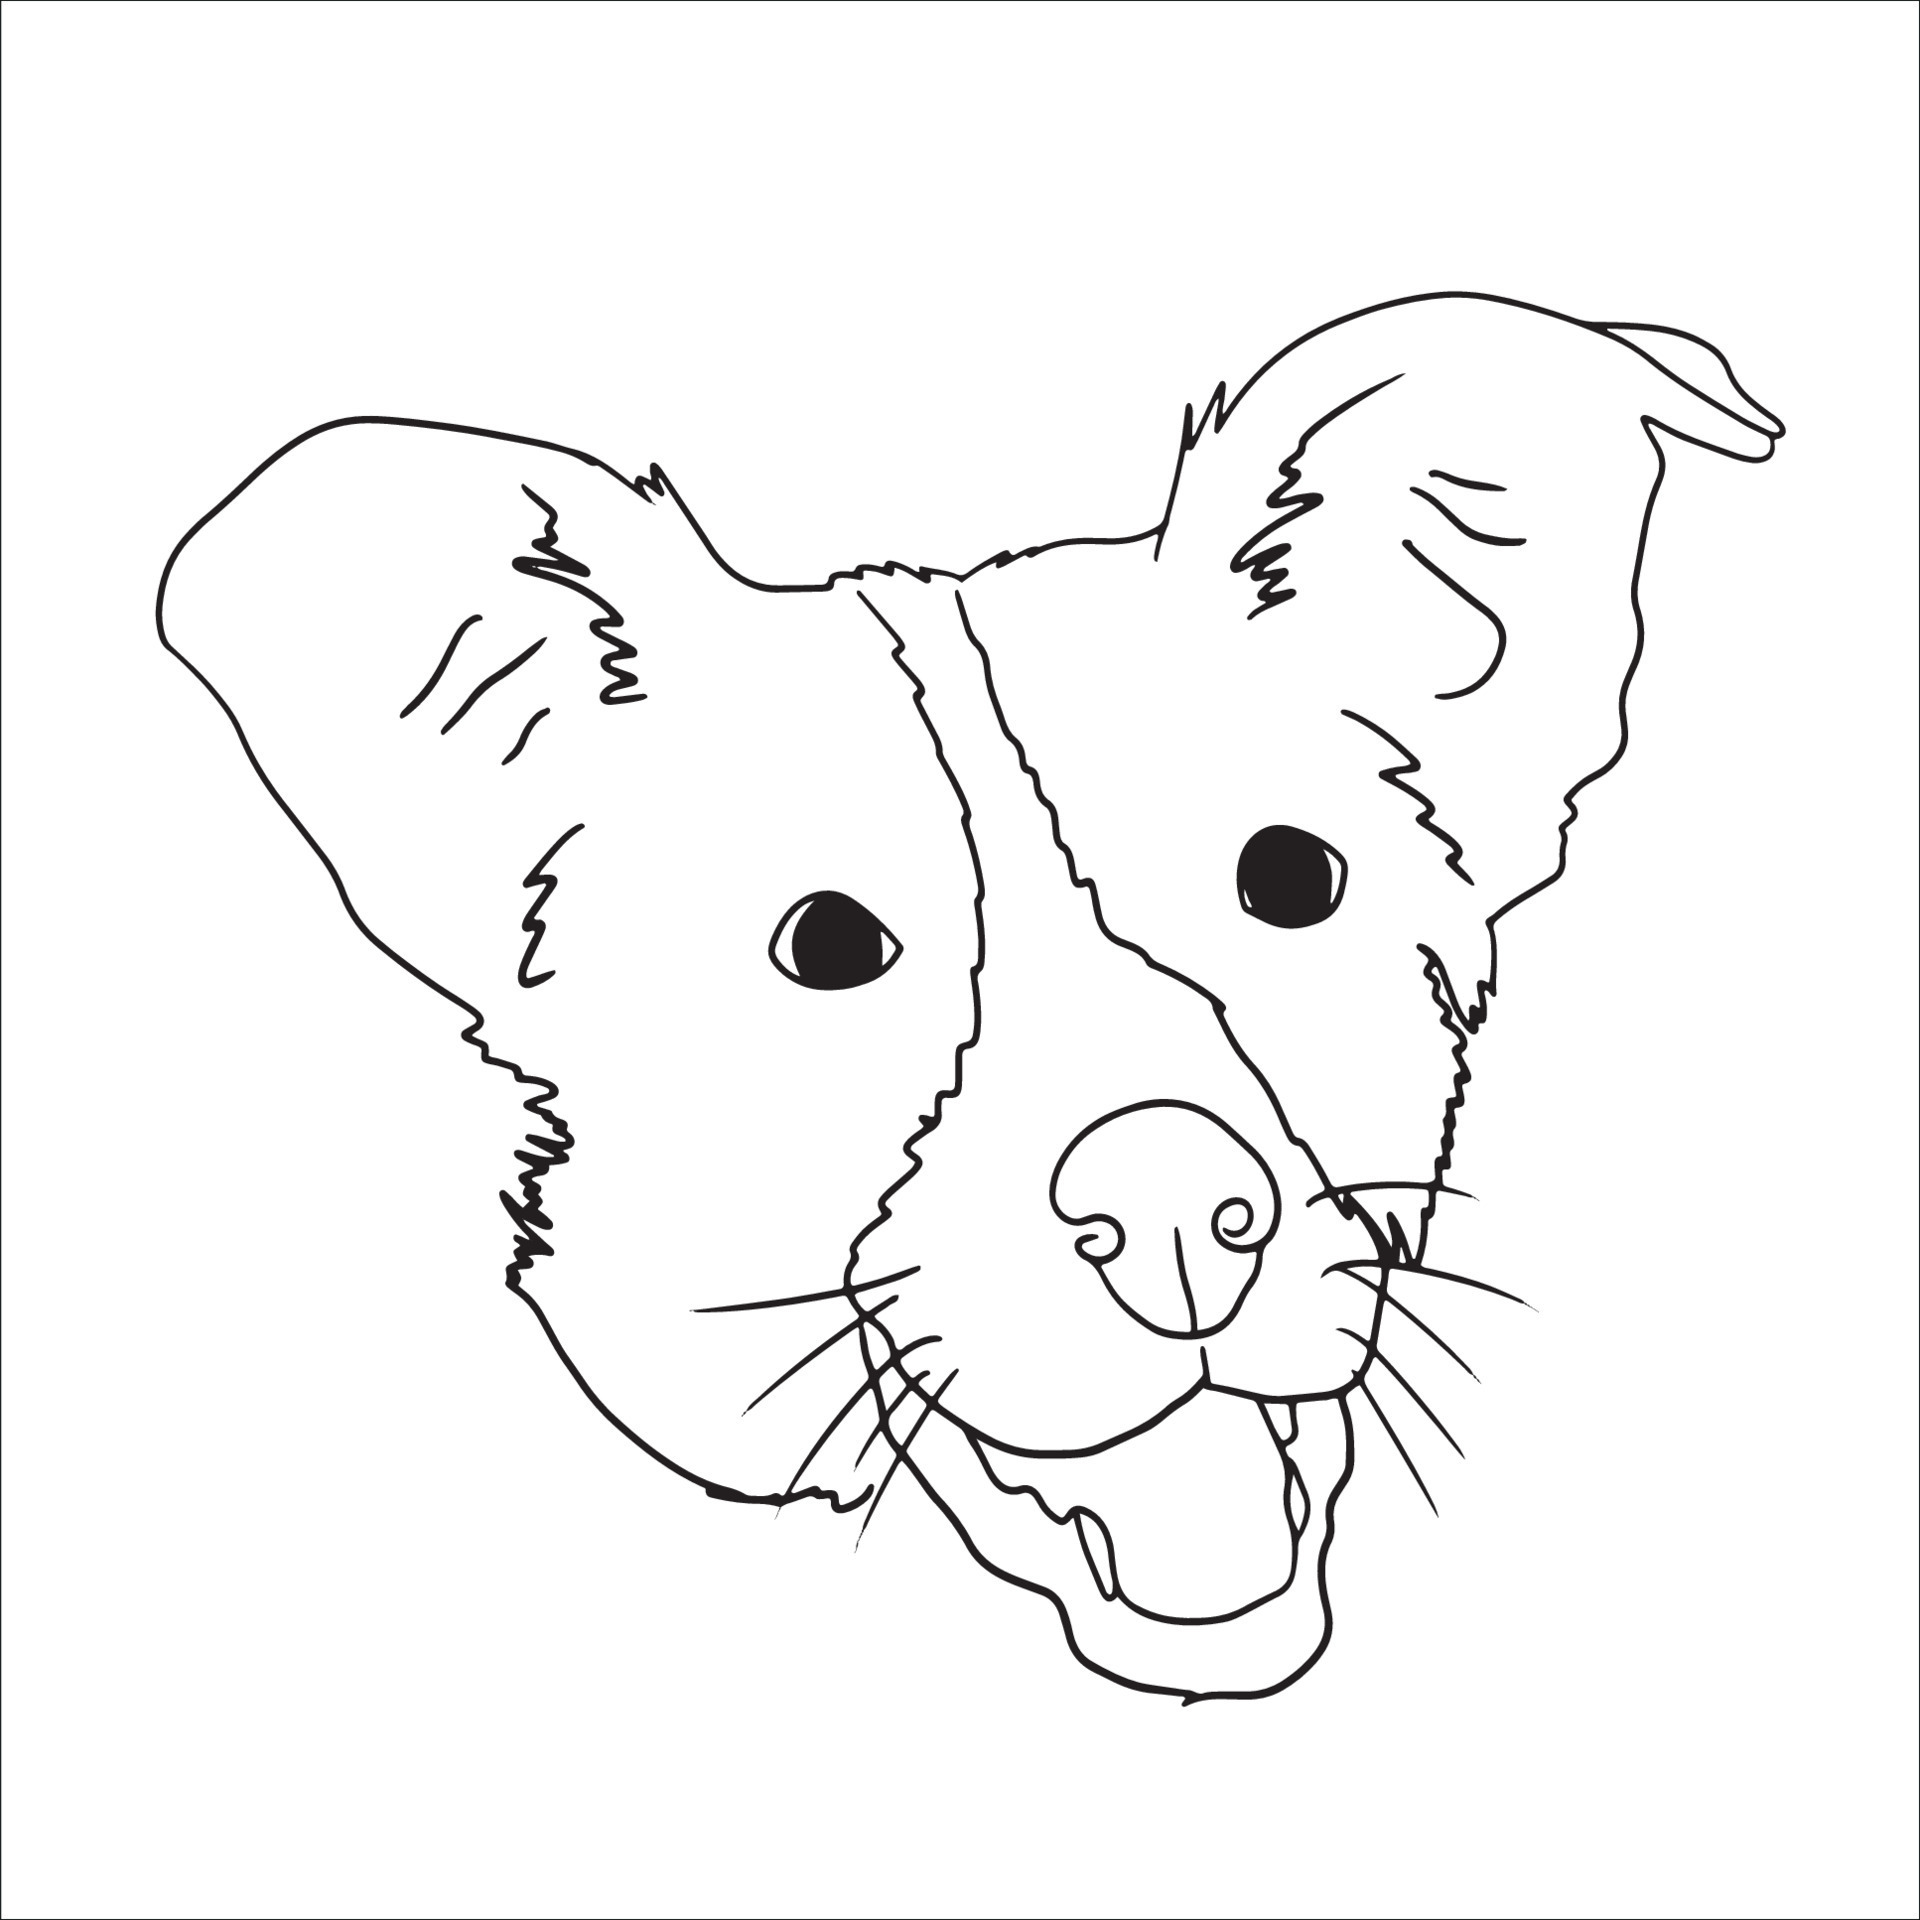 How to draw a Dog Step by Step  Easy drawings Tutorials  YouTube